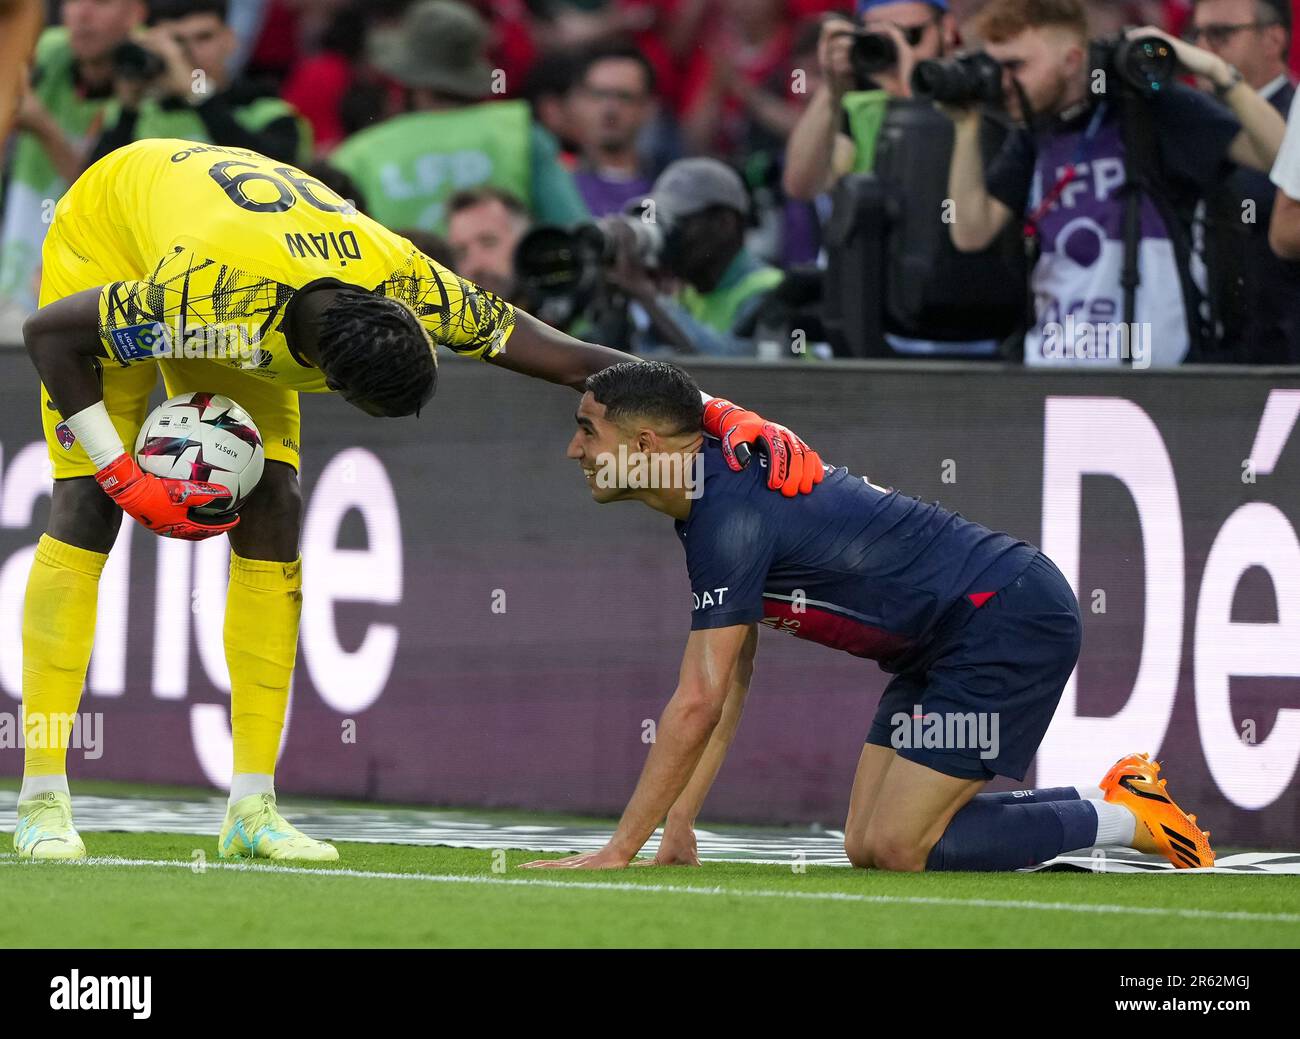 Goalkeeper Mory Diaw of Clermont and Achraf Hakimi of PSG during the Ligue 1 match between Paris Saint Germain and Clermont Foot at Parc des Princes, Stock Photo